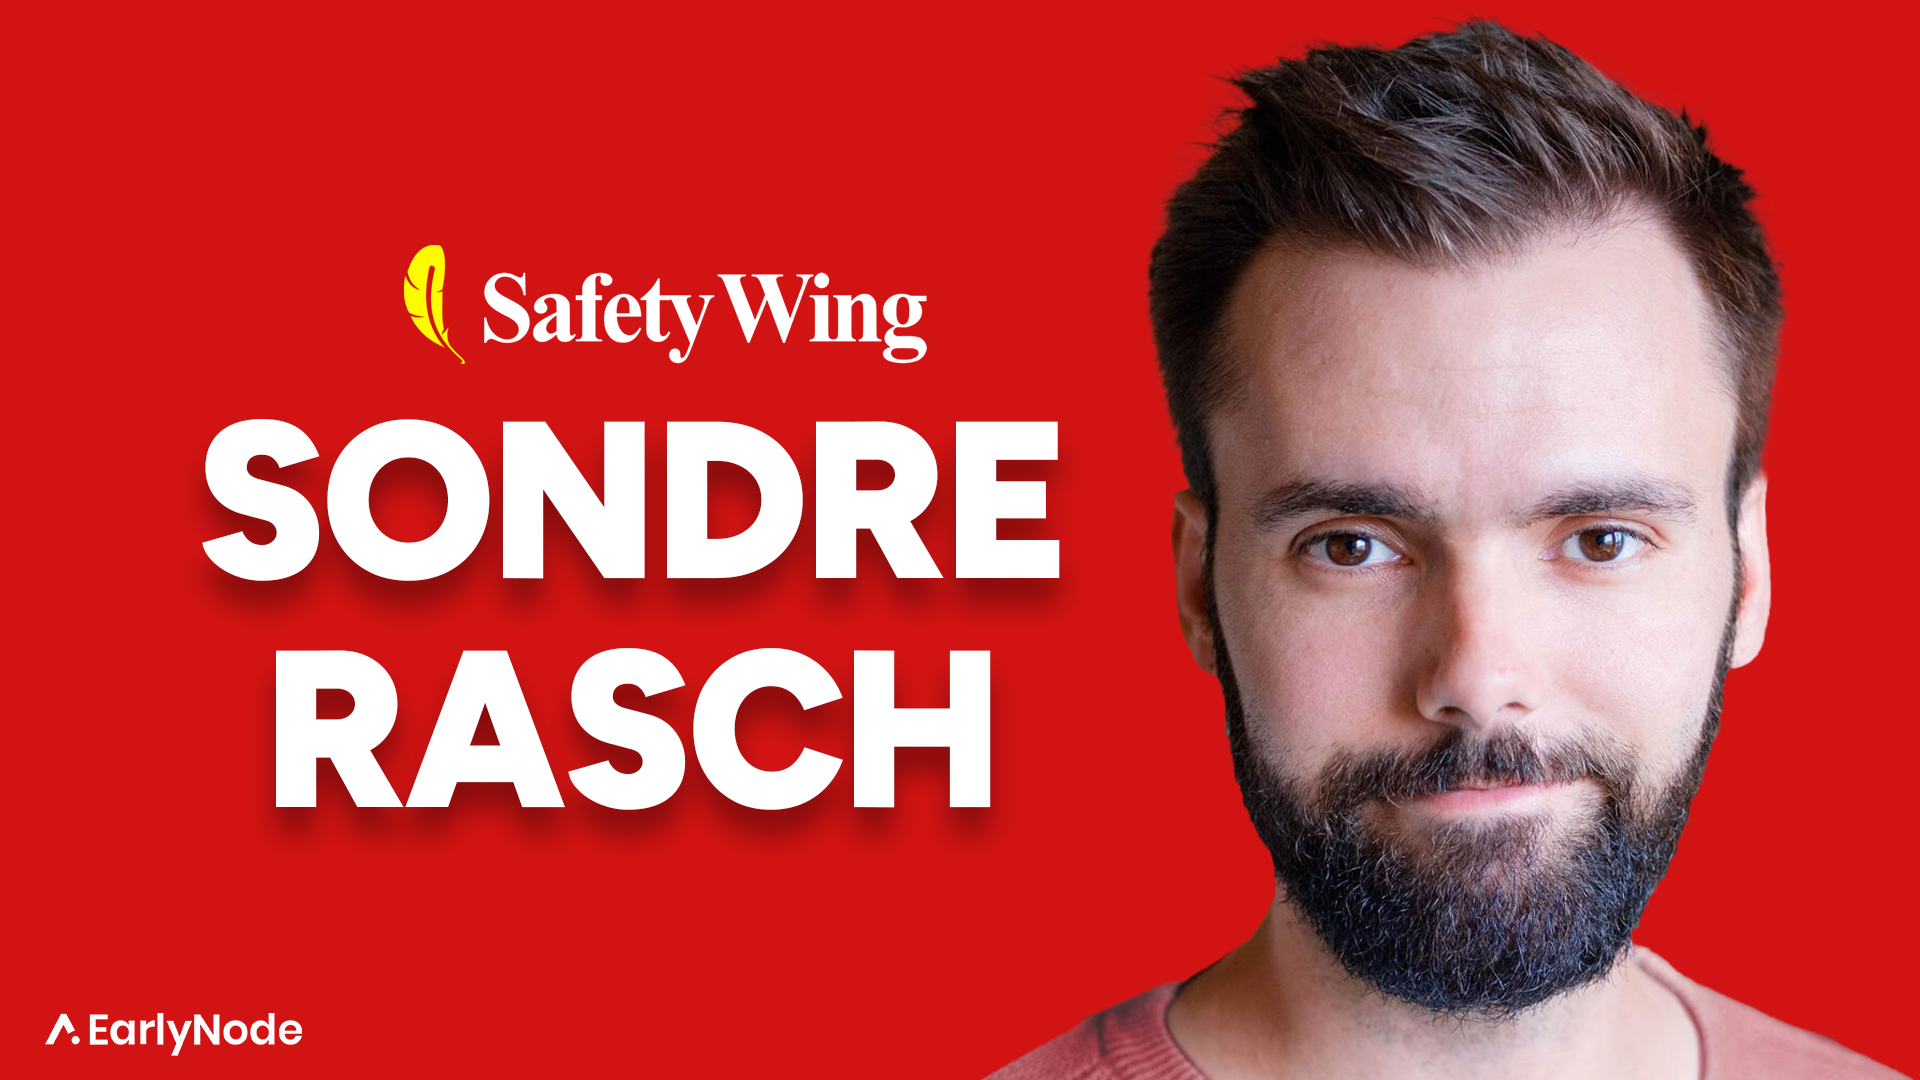 How to grow an insurtech startup with Sondre Rasch, Founder of SafetyWing